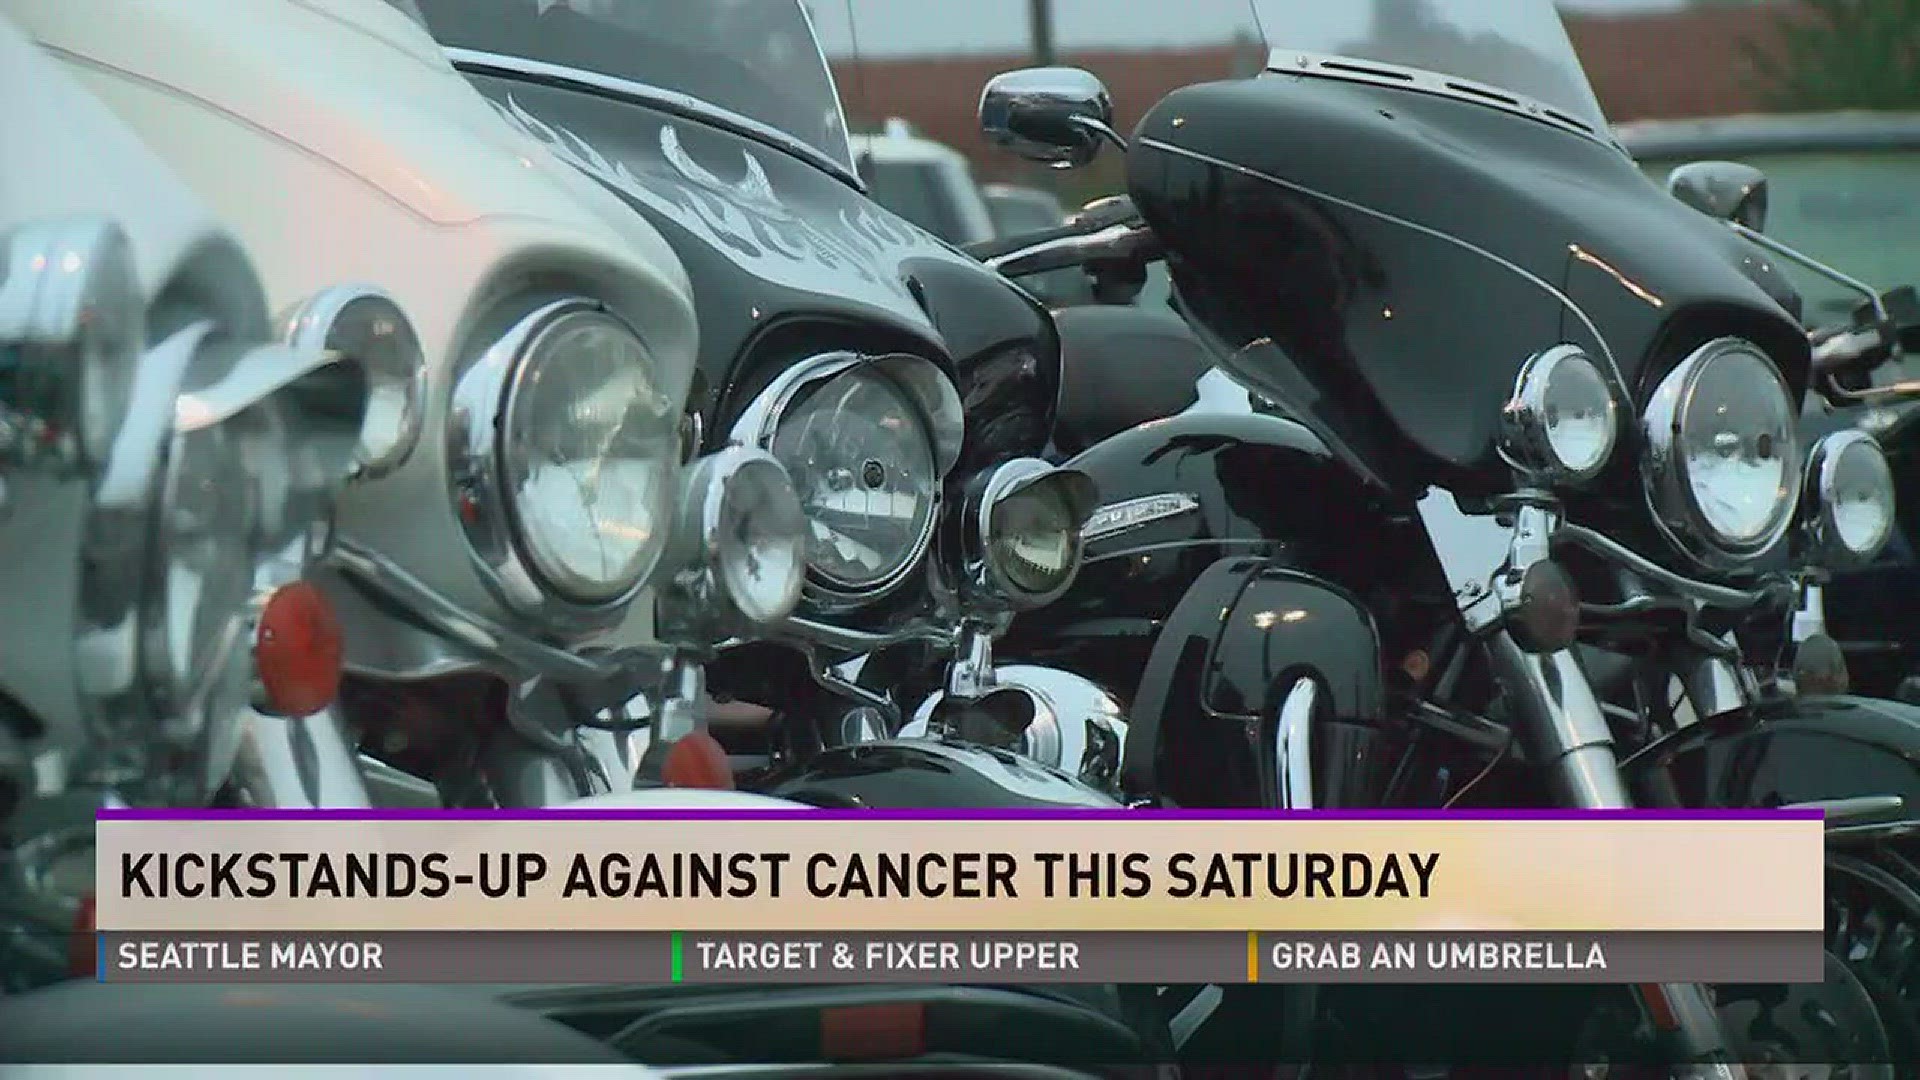 The motorcycle run leaves at 11 a.m. in Jefferson City.